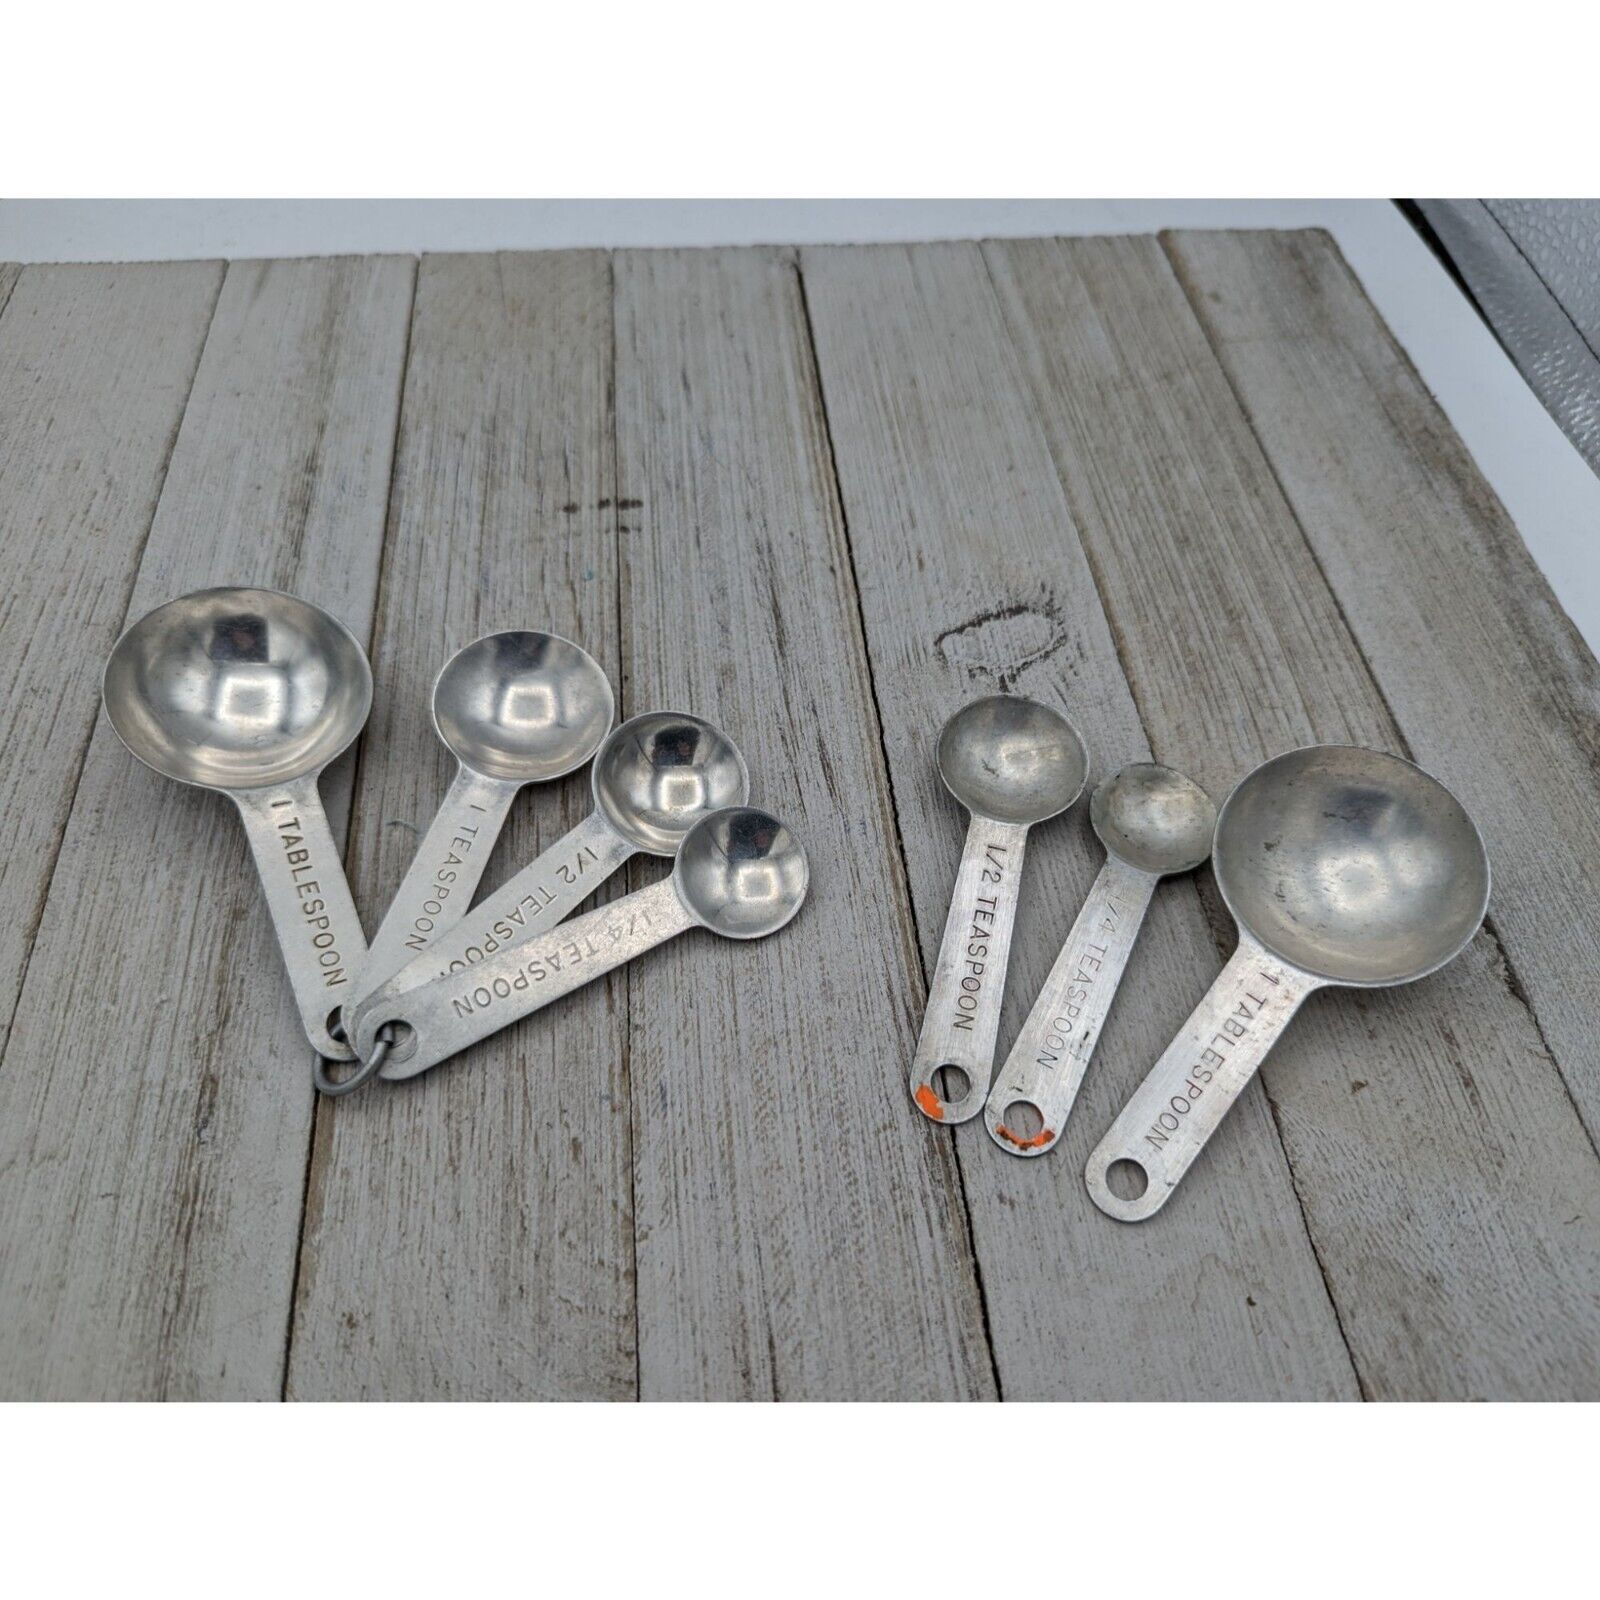 Vintage Tupperware Measuring Spoons Mixed Sets 7 and 8 Piece Sets